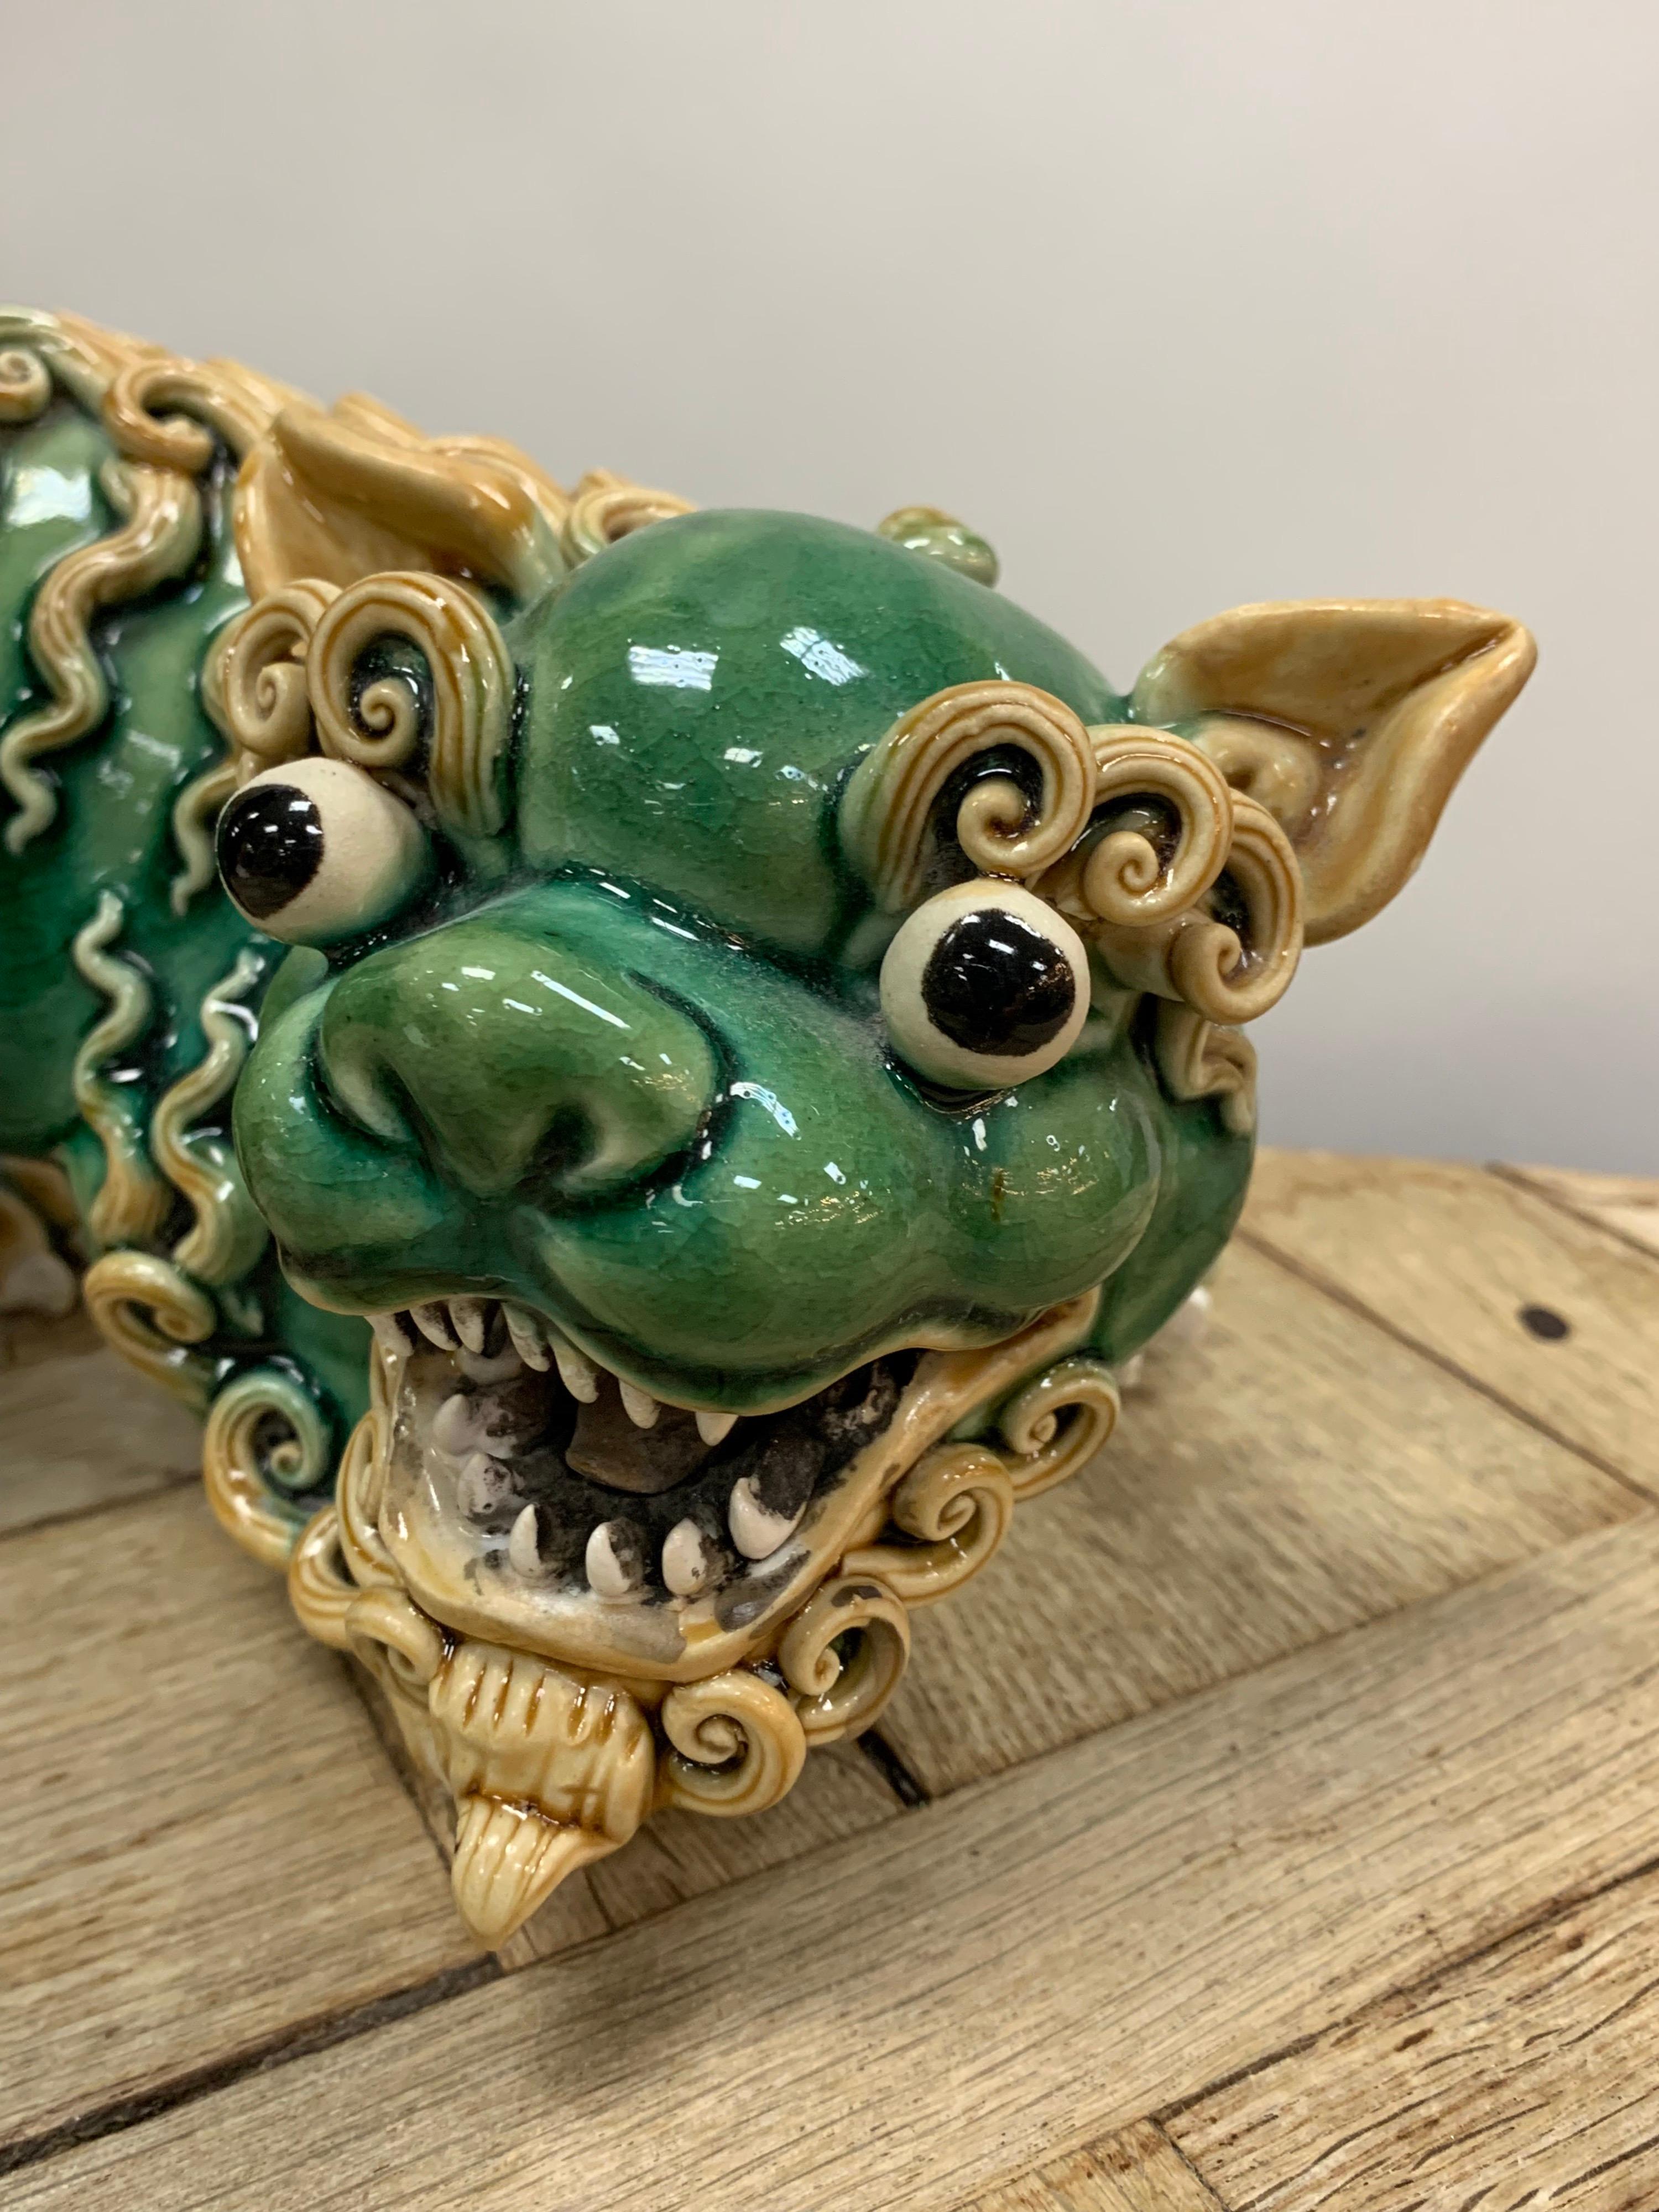 19th century Chinese standing export Foo Lion, no chips, cracks or repairs.